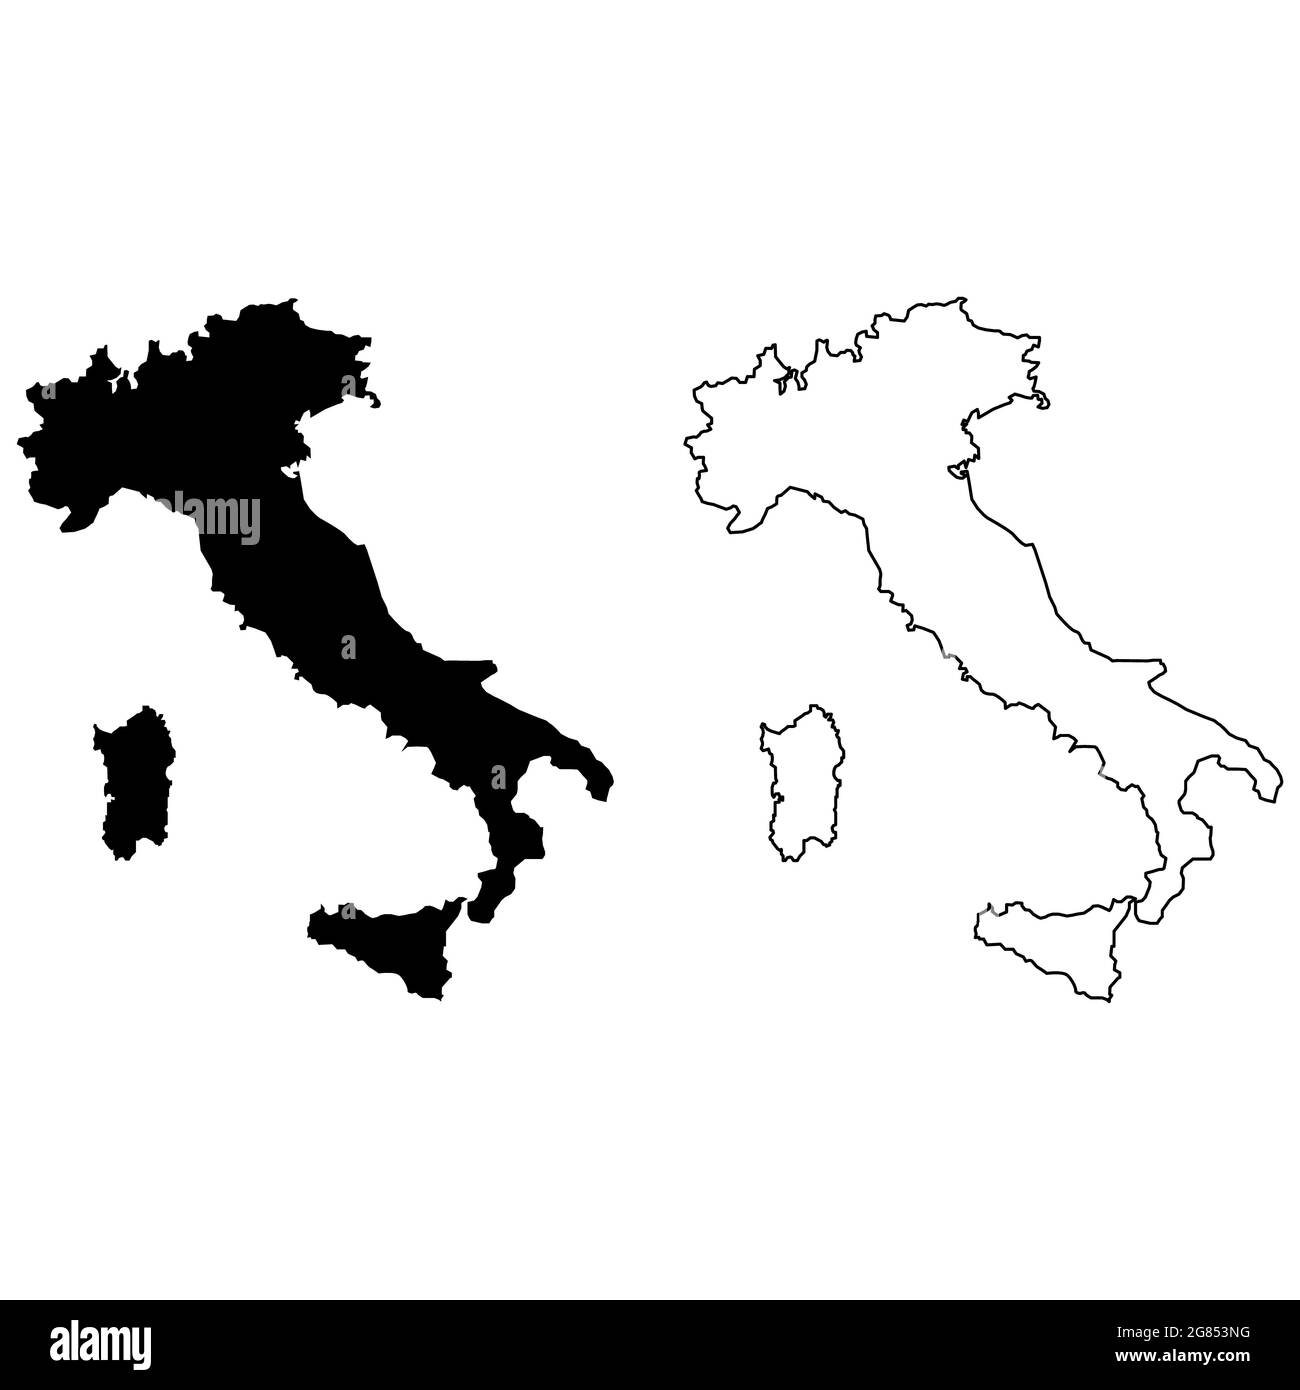 black map of Italy on white background. outline map of Italy sign. flat style. Stock Photo